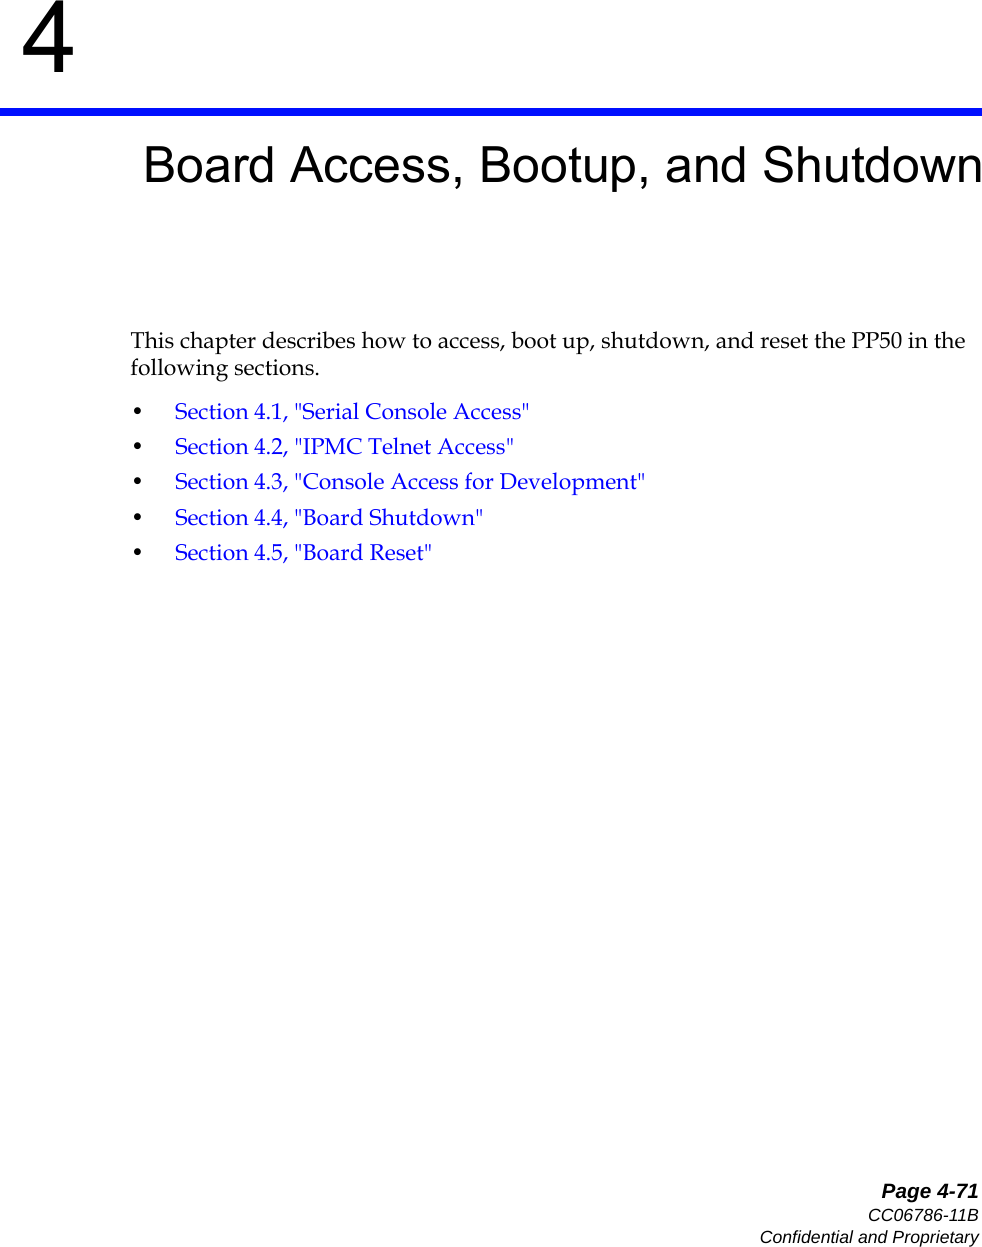   Page 4-71CC06786-11BConfidential and Proprietary4Preliminary4Board Access, Bootup, and ShutdownThis chapter describes how to access, boot up, shutdown, and reset the PP50 in the following sections. •Section4.1, &quot;Serial Console Access&quot;•Section4.2, &quot;IPMC Telnet Access&quot;•Section4.3, &quot;Console Access for Development&quot;•Section4.4, &quot;Board Shutdown&quot;•Section4.5, &quot;Board Reset&quot;